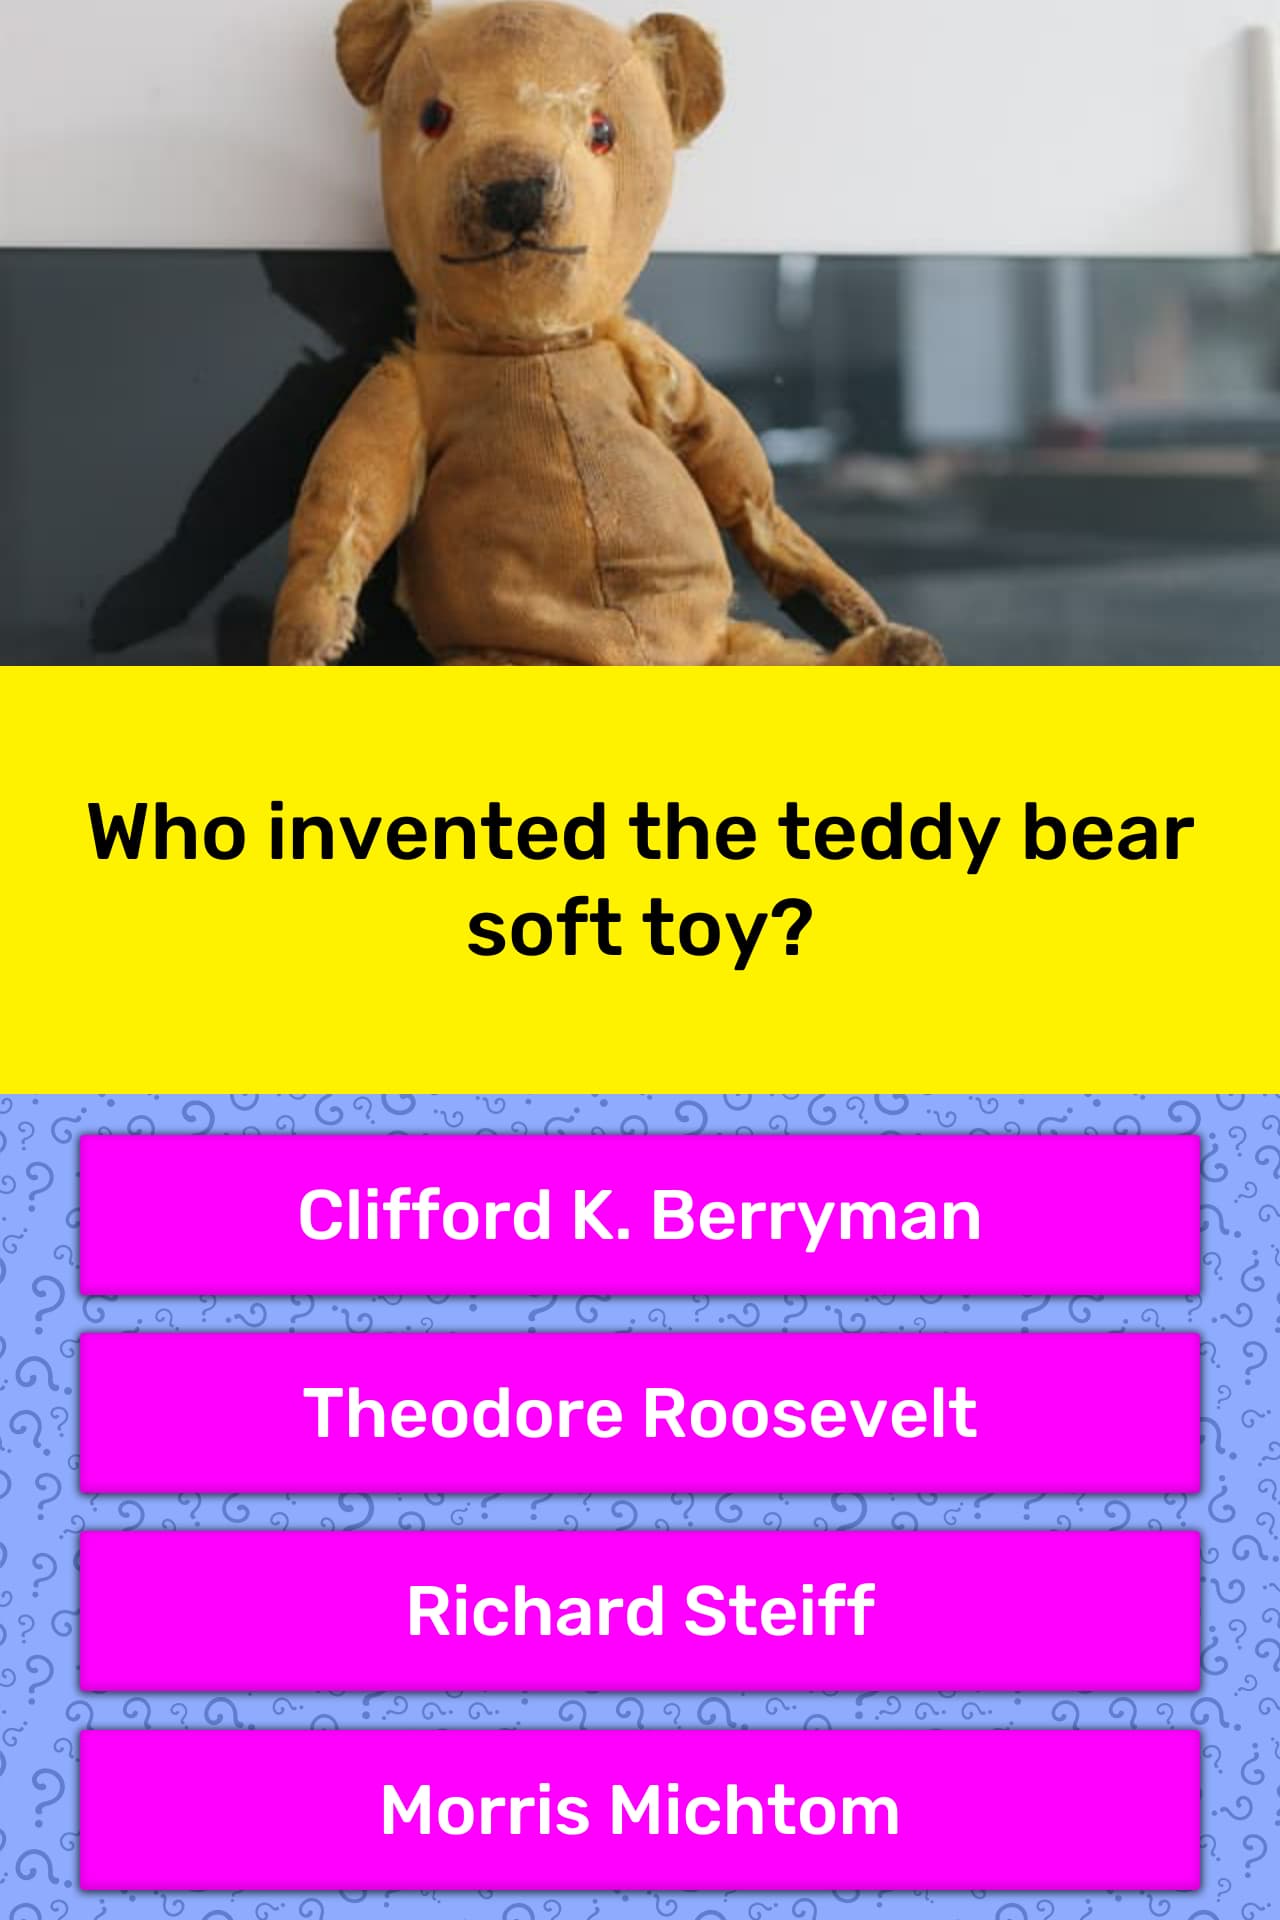 who invented the teddy bear